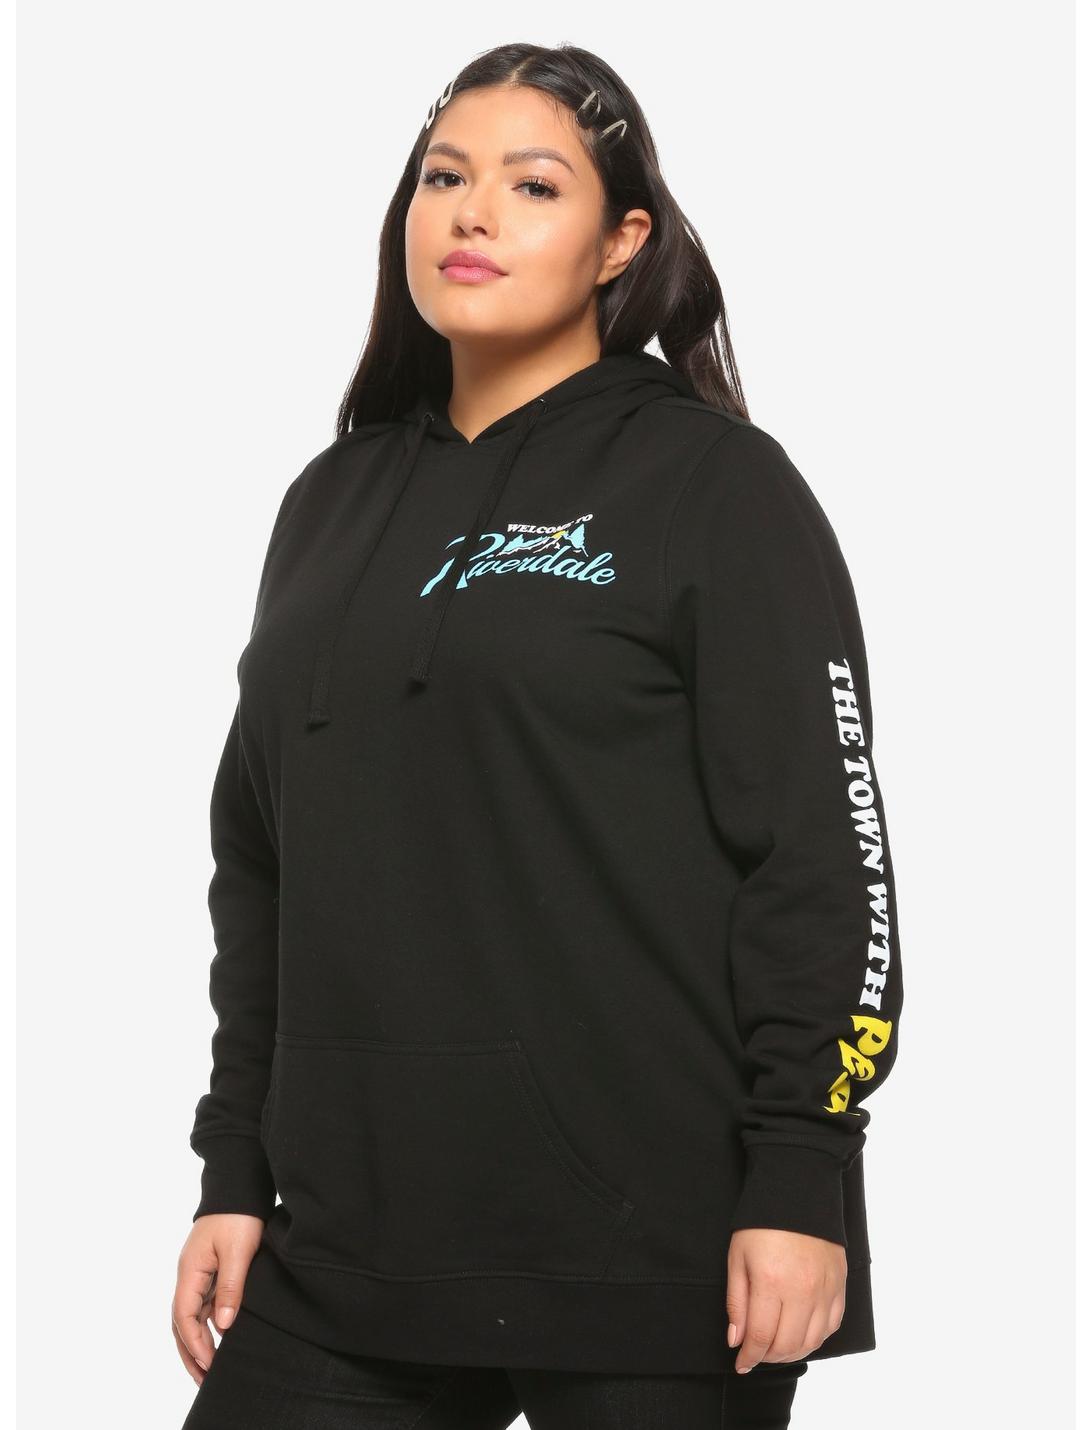 Riverdale Welcome To Riverdale Girls Hoodie Plus Size Hot Topic Exclusive, MULTI, hi-res